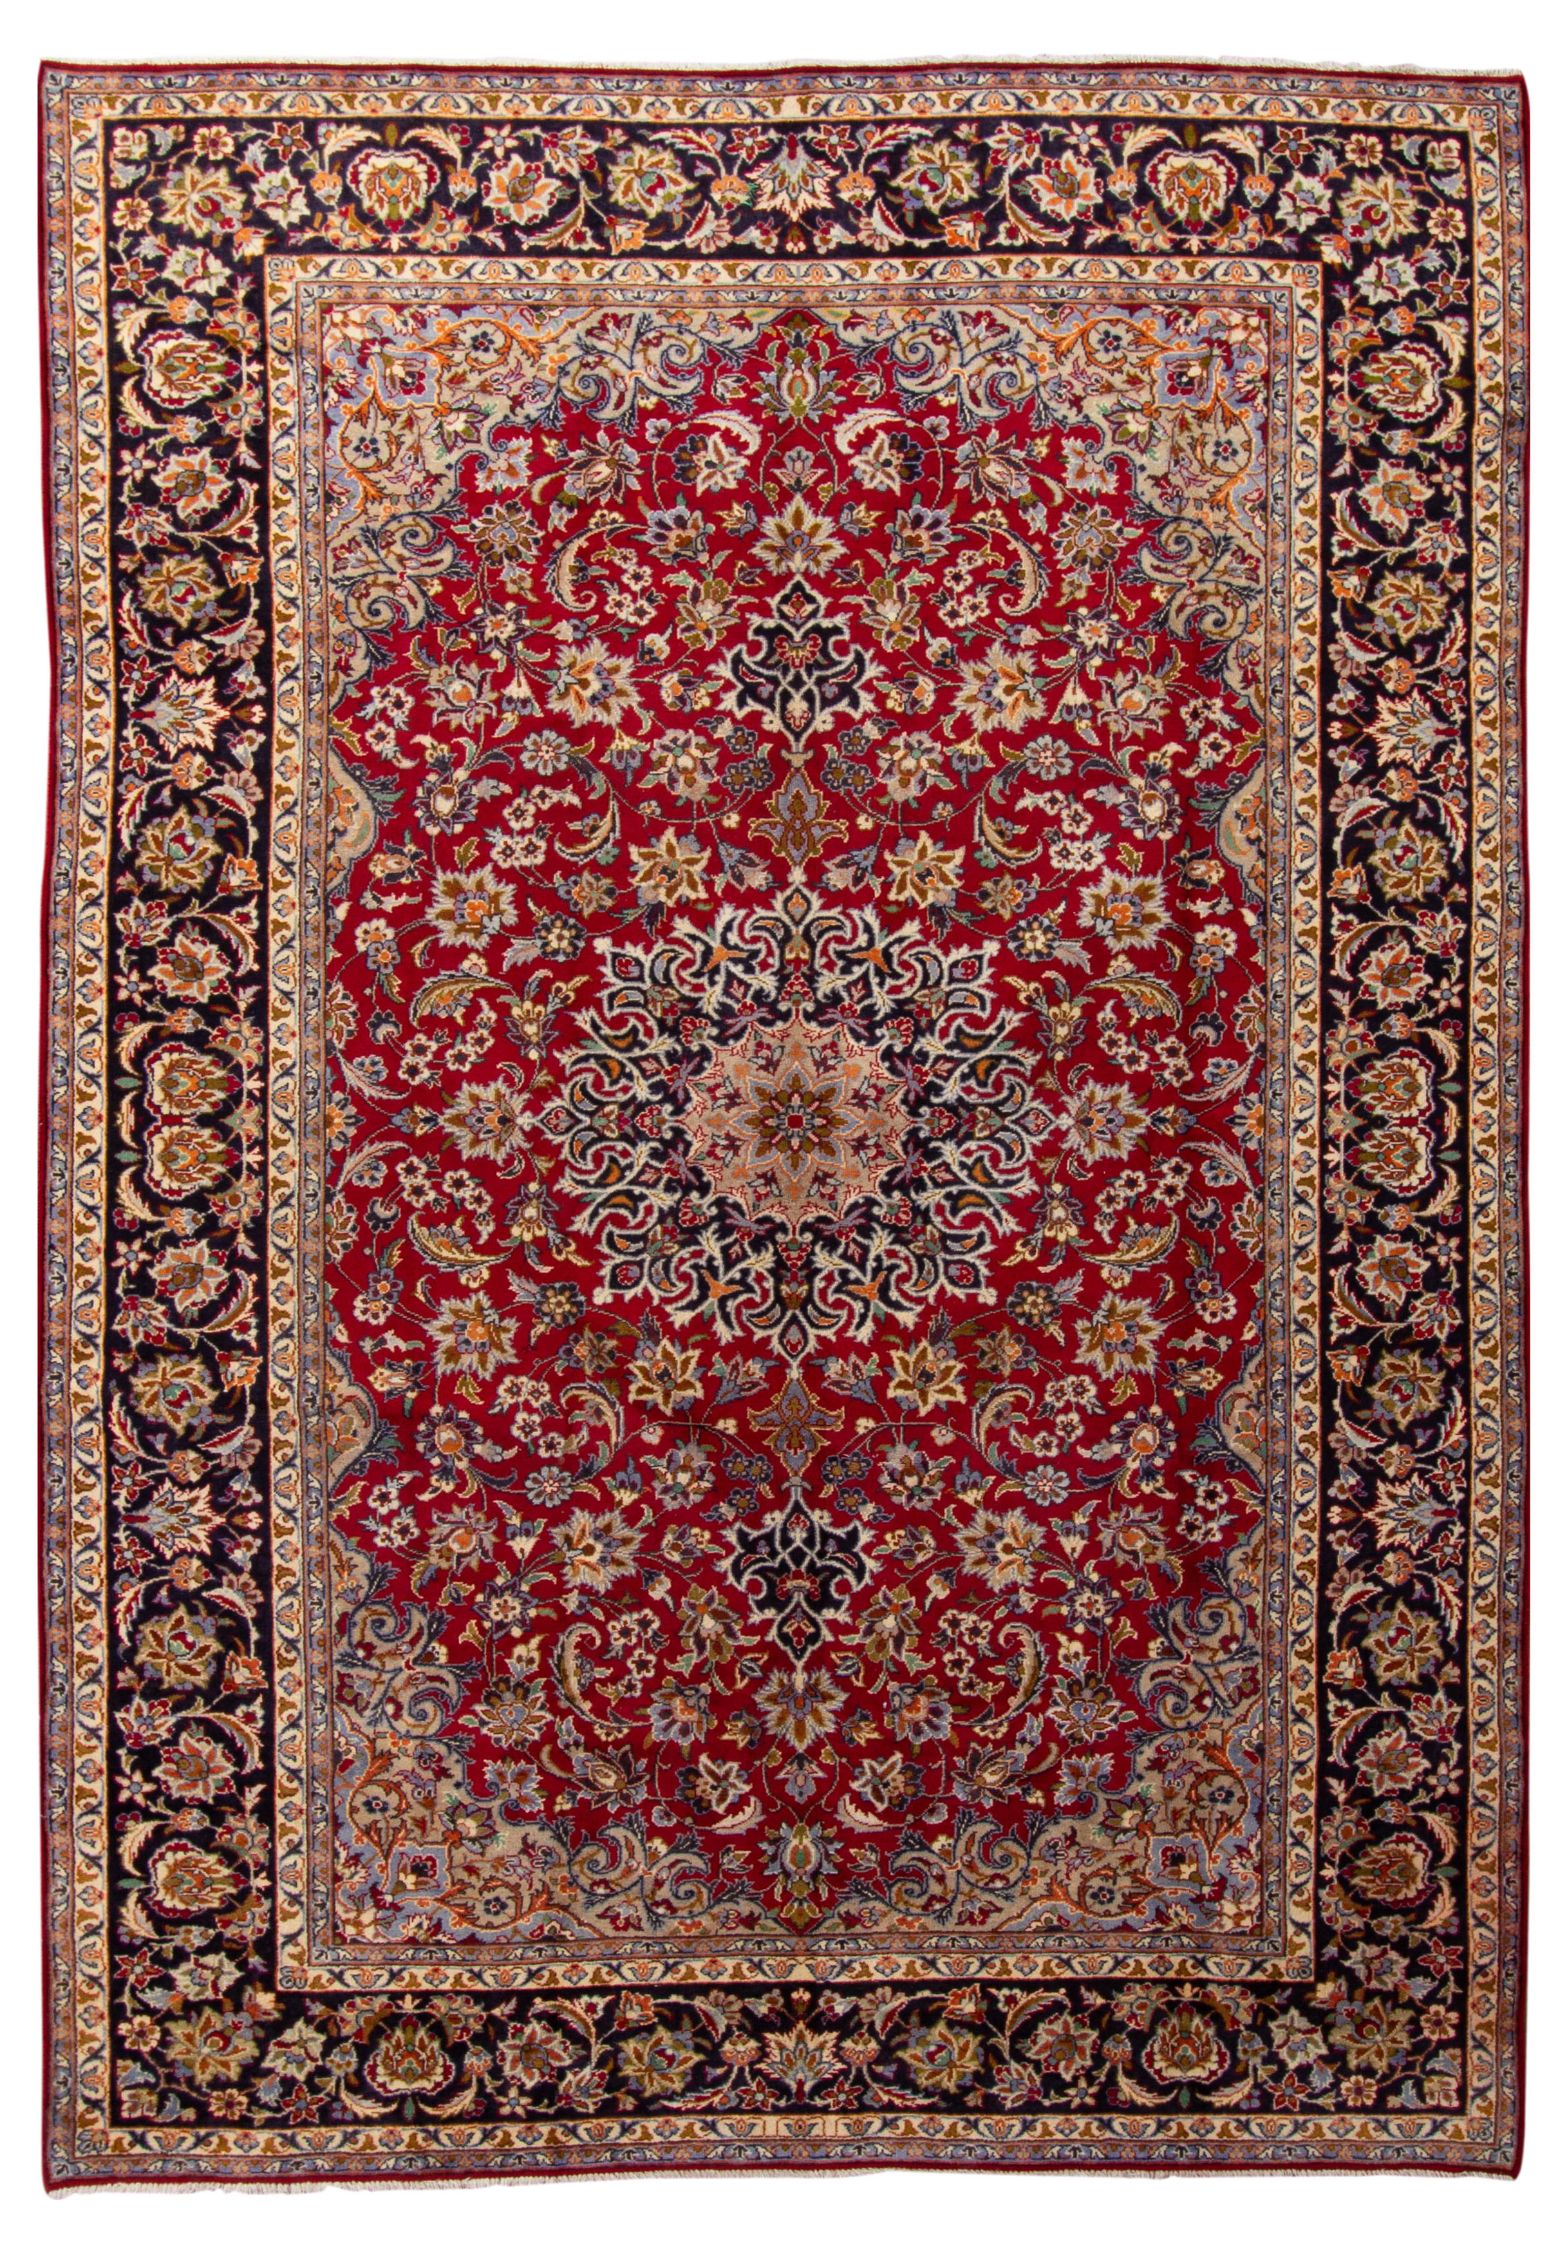 Hand-knotted Najafabad  Wool Rug 8'4" x 12'4" Size: 8'4" x 12'4"  